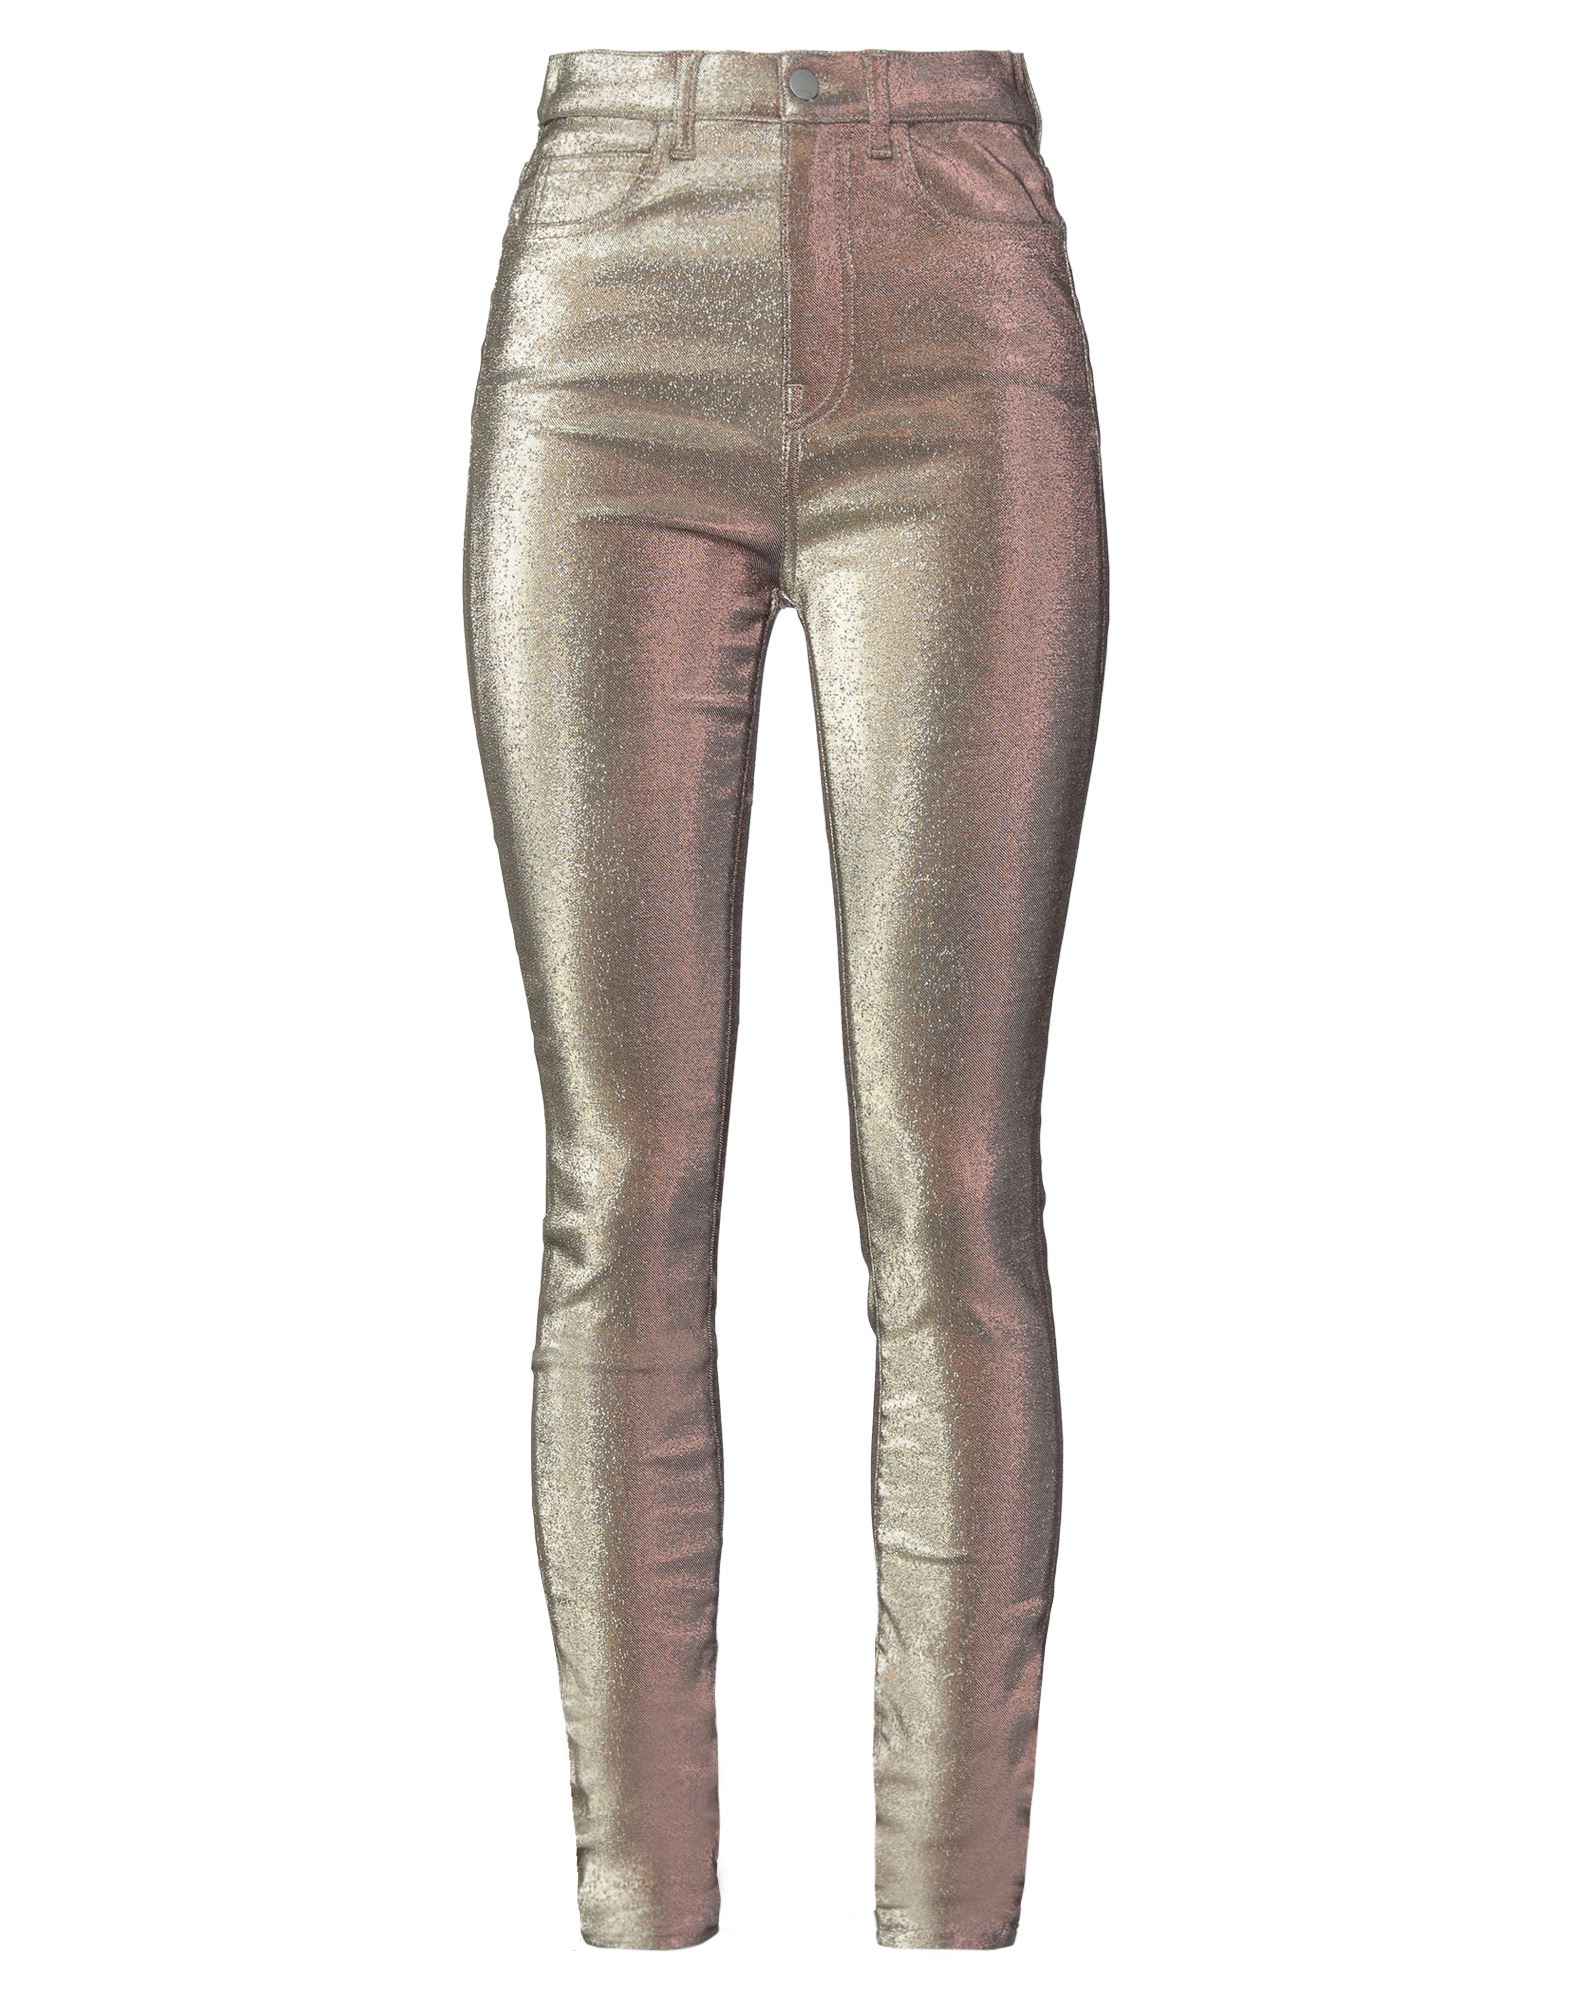 CIRCUS HOTEL CIRCUS HOTEL WOMAN PANTS GOLD SIZE 4 COTTON, POLYESTER, ELASTANE